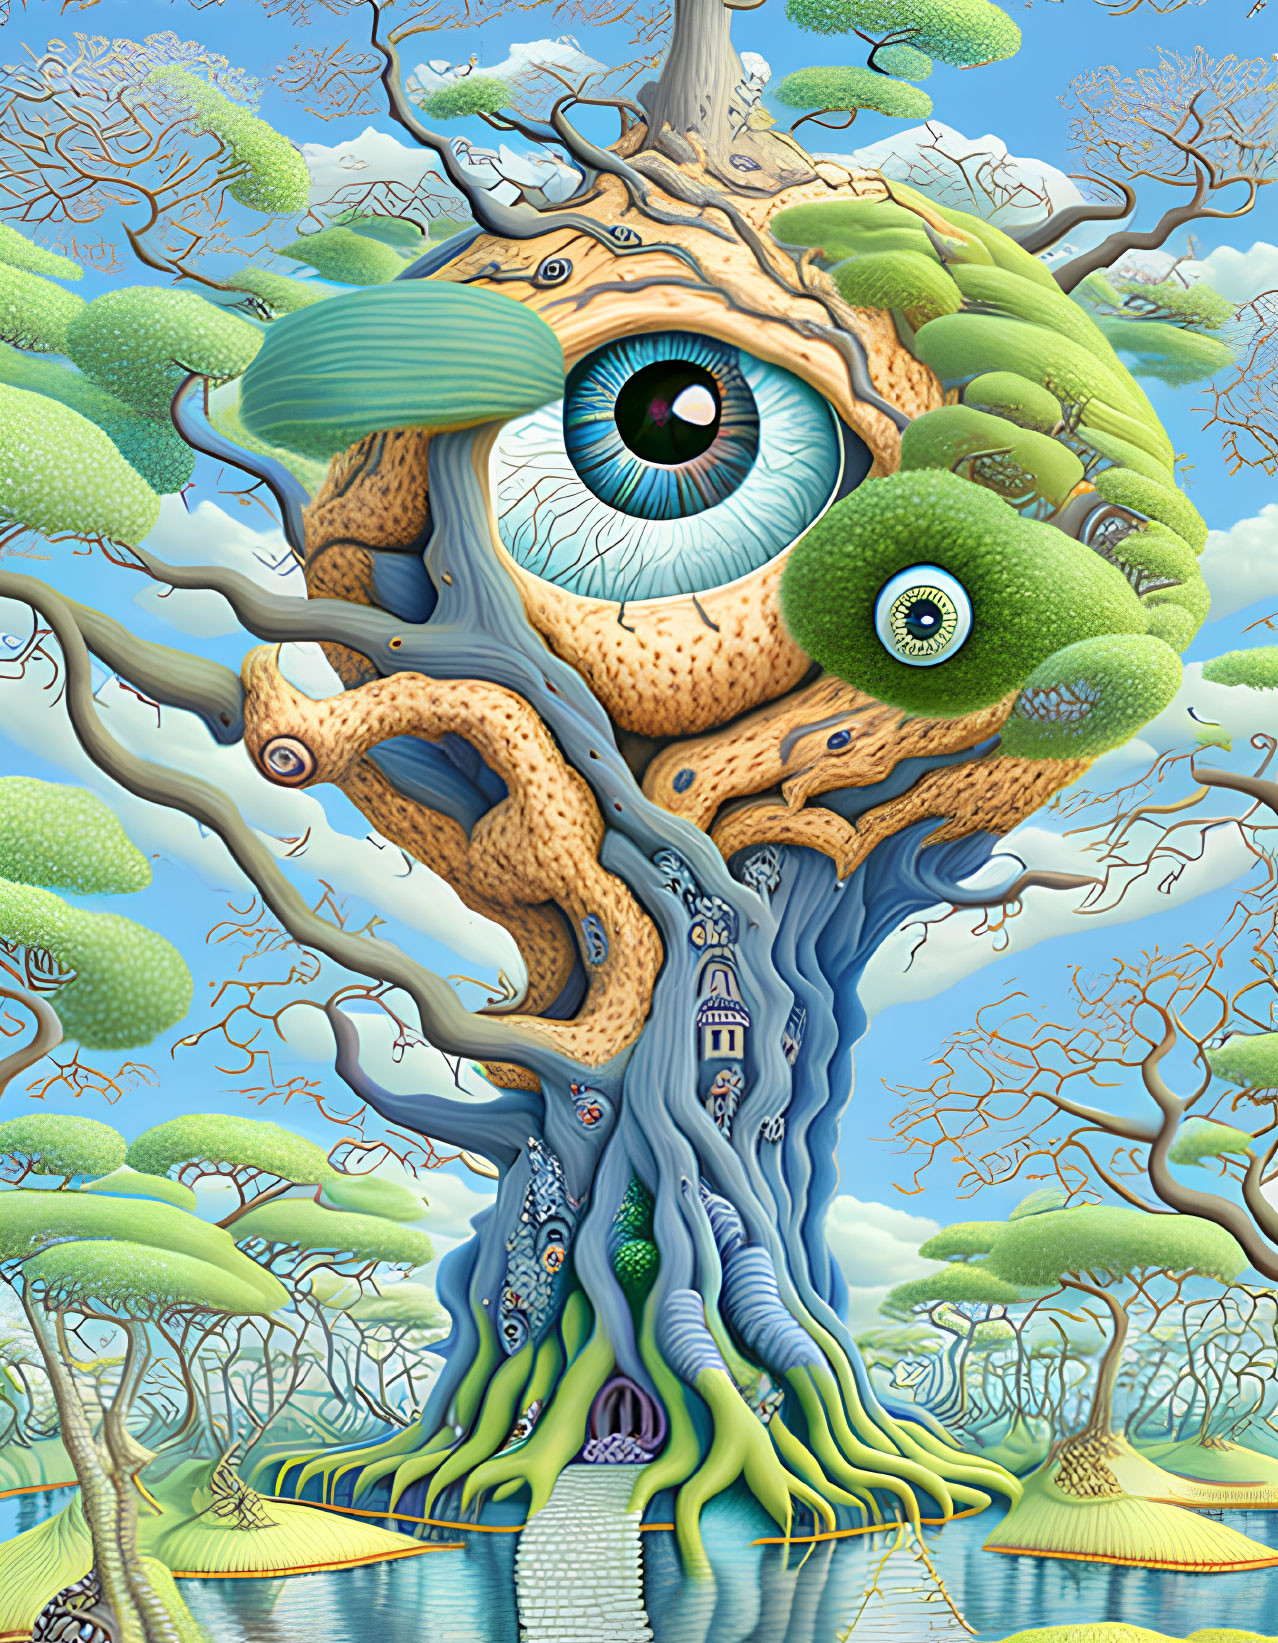 Surreal illustration of eye-shaped canopy trees in whimsical forest